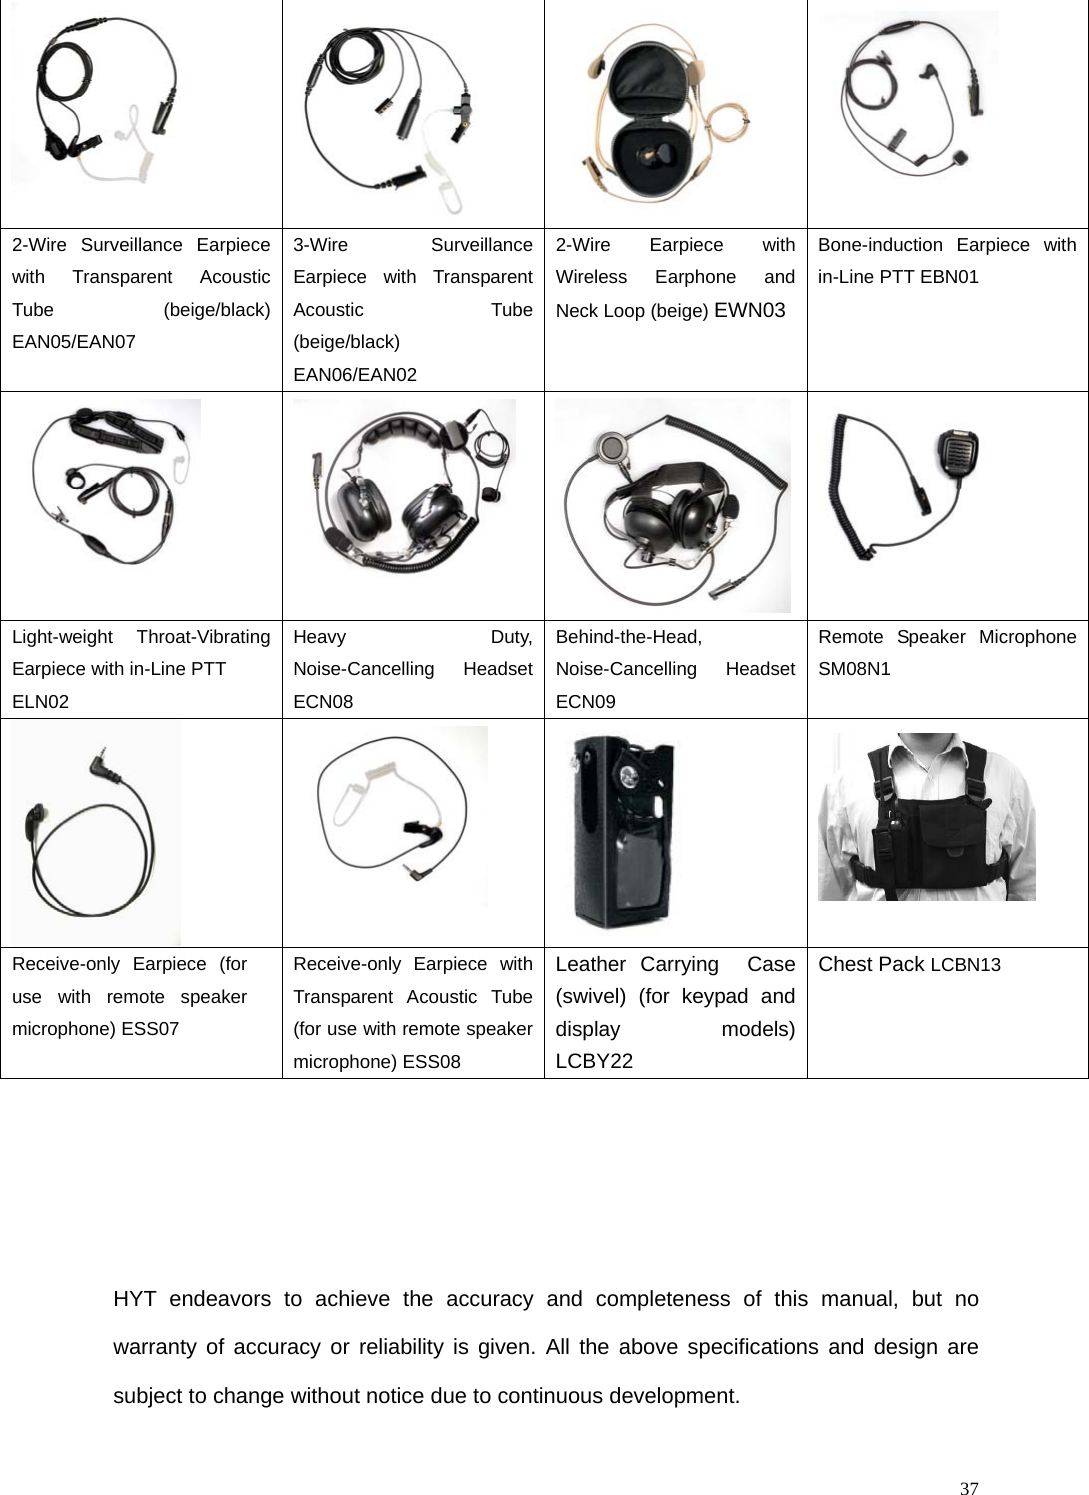   37    2-Wire Surveillance Earpiece with Transparent Acoustic Tube  (beige/black)  EAN05/EAN07 3-Wire Surveillance Earpiece with Transparent Acoustic Tube  (beige/black)  EAN06/EAN02 2-Wire Earpiece with Wireless Earphone and Neck Loop (beige) EWN03 Bone-induction Earpiece with in-Line PTT EBN01    Light-weight Throat-Vibrating Earpiece with in-Line PTT ELN02 Heavy Duty, Noise-Cancelling Headset ECN08 Behind-the-Head, Noise-Cancelling Headset ECN09 Remote Speaker Microphone SM08N1     Receive-only Earpiece (for use with remote speaker microphone) ESS07 Receive-only Earpiece with Transparent Acoustic Tube (for use with remote speaker microphone) ESS08 Leather Carrying  Case  (swivel) (for keypad and display models)  LCBY22 Chest Pack LCBN13     HYT endeavors to achieve the accuracy and completeness of this manual, but no warranty of accuracy or reliability is given. All the above specifications and design are subject to change without notice due to continuous development. 